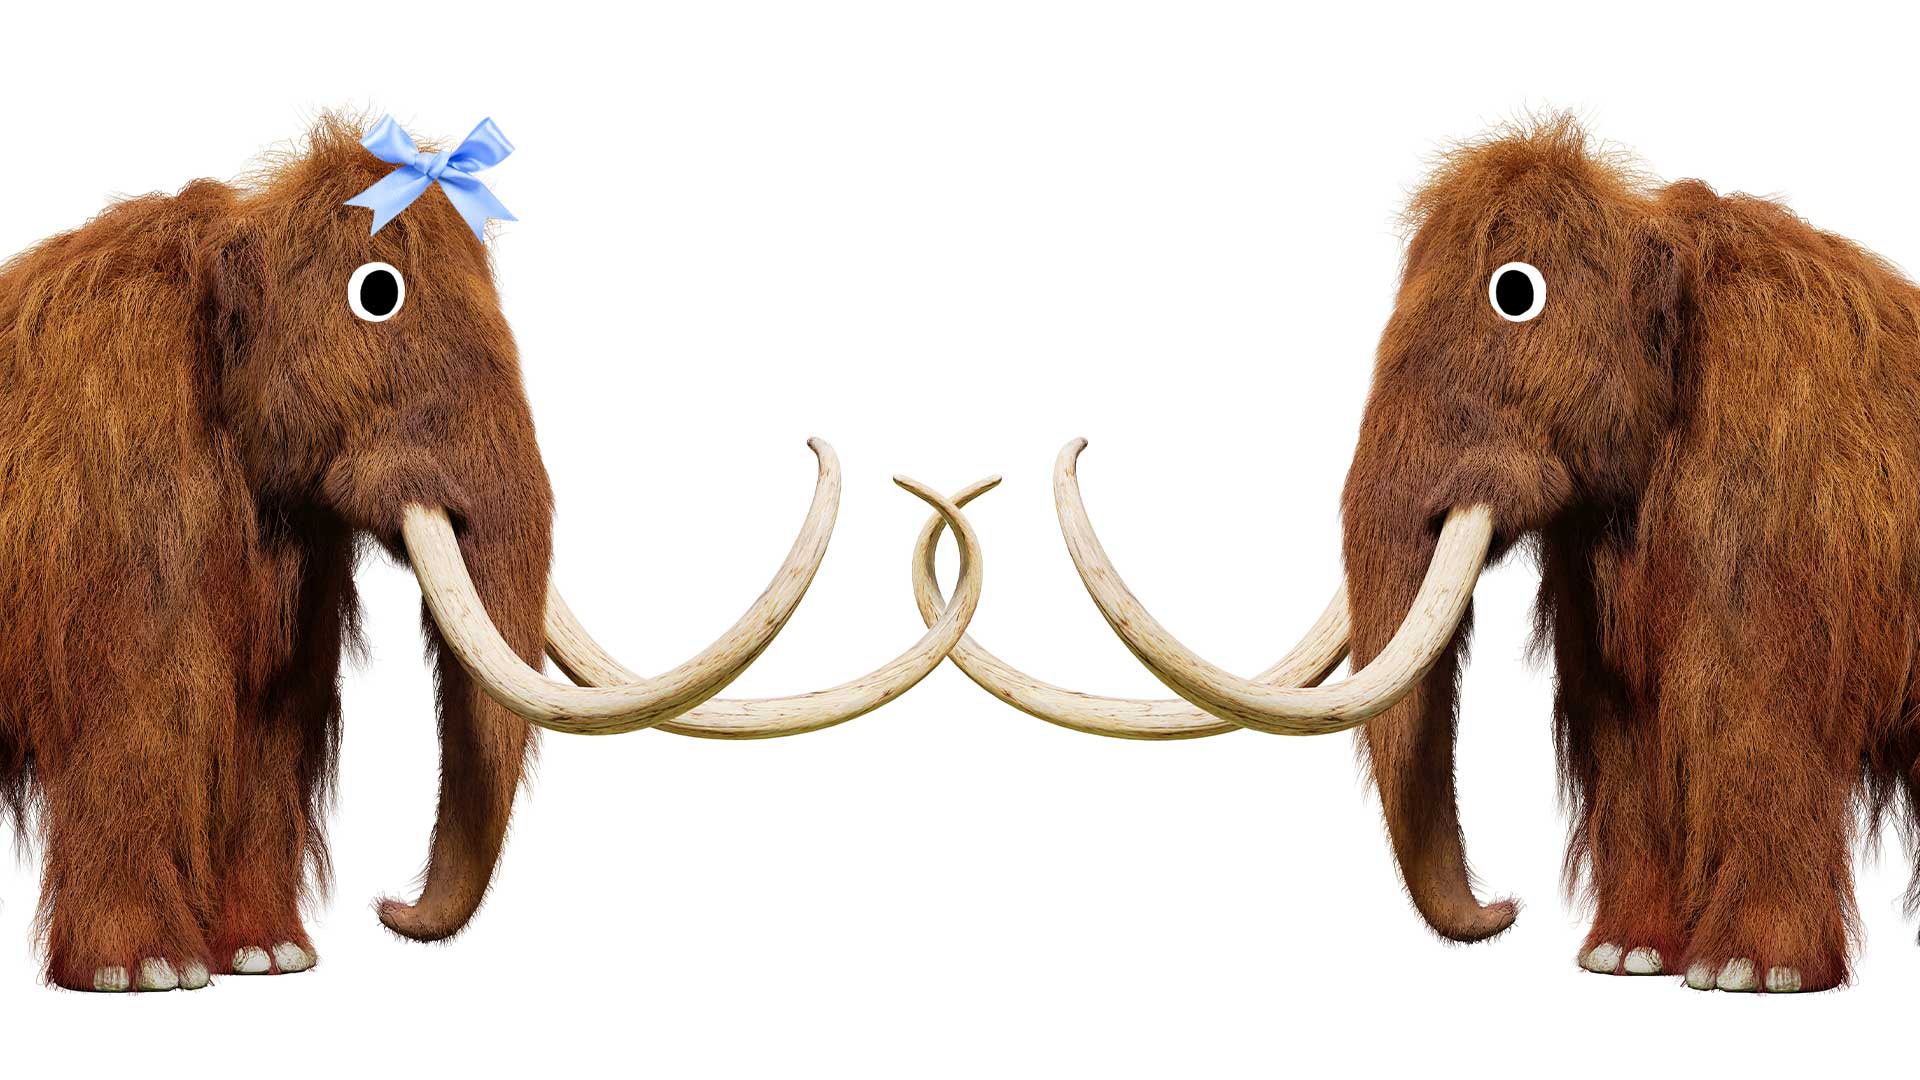 Two wooly mammoths facing each other